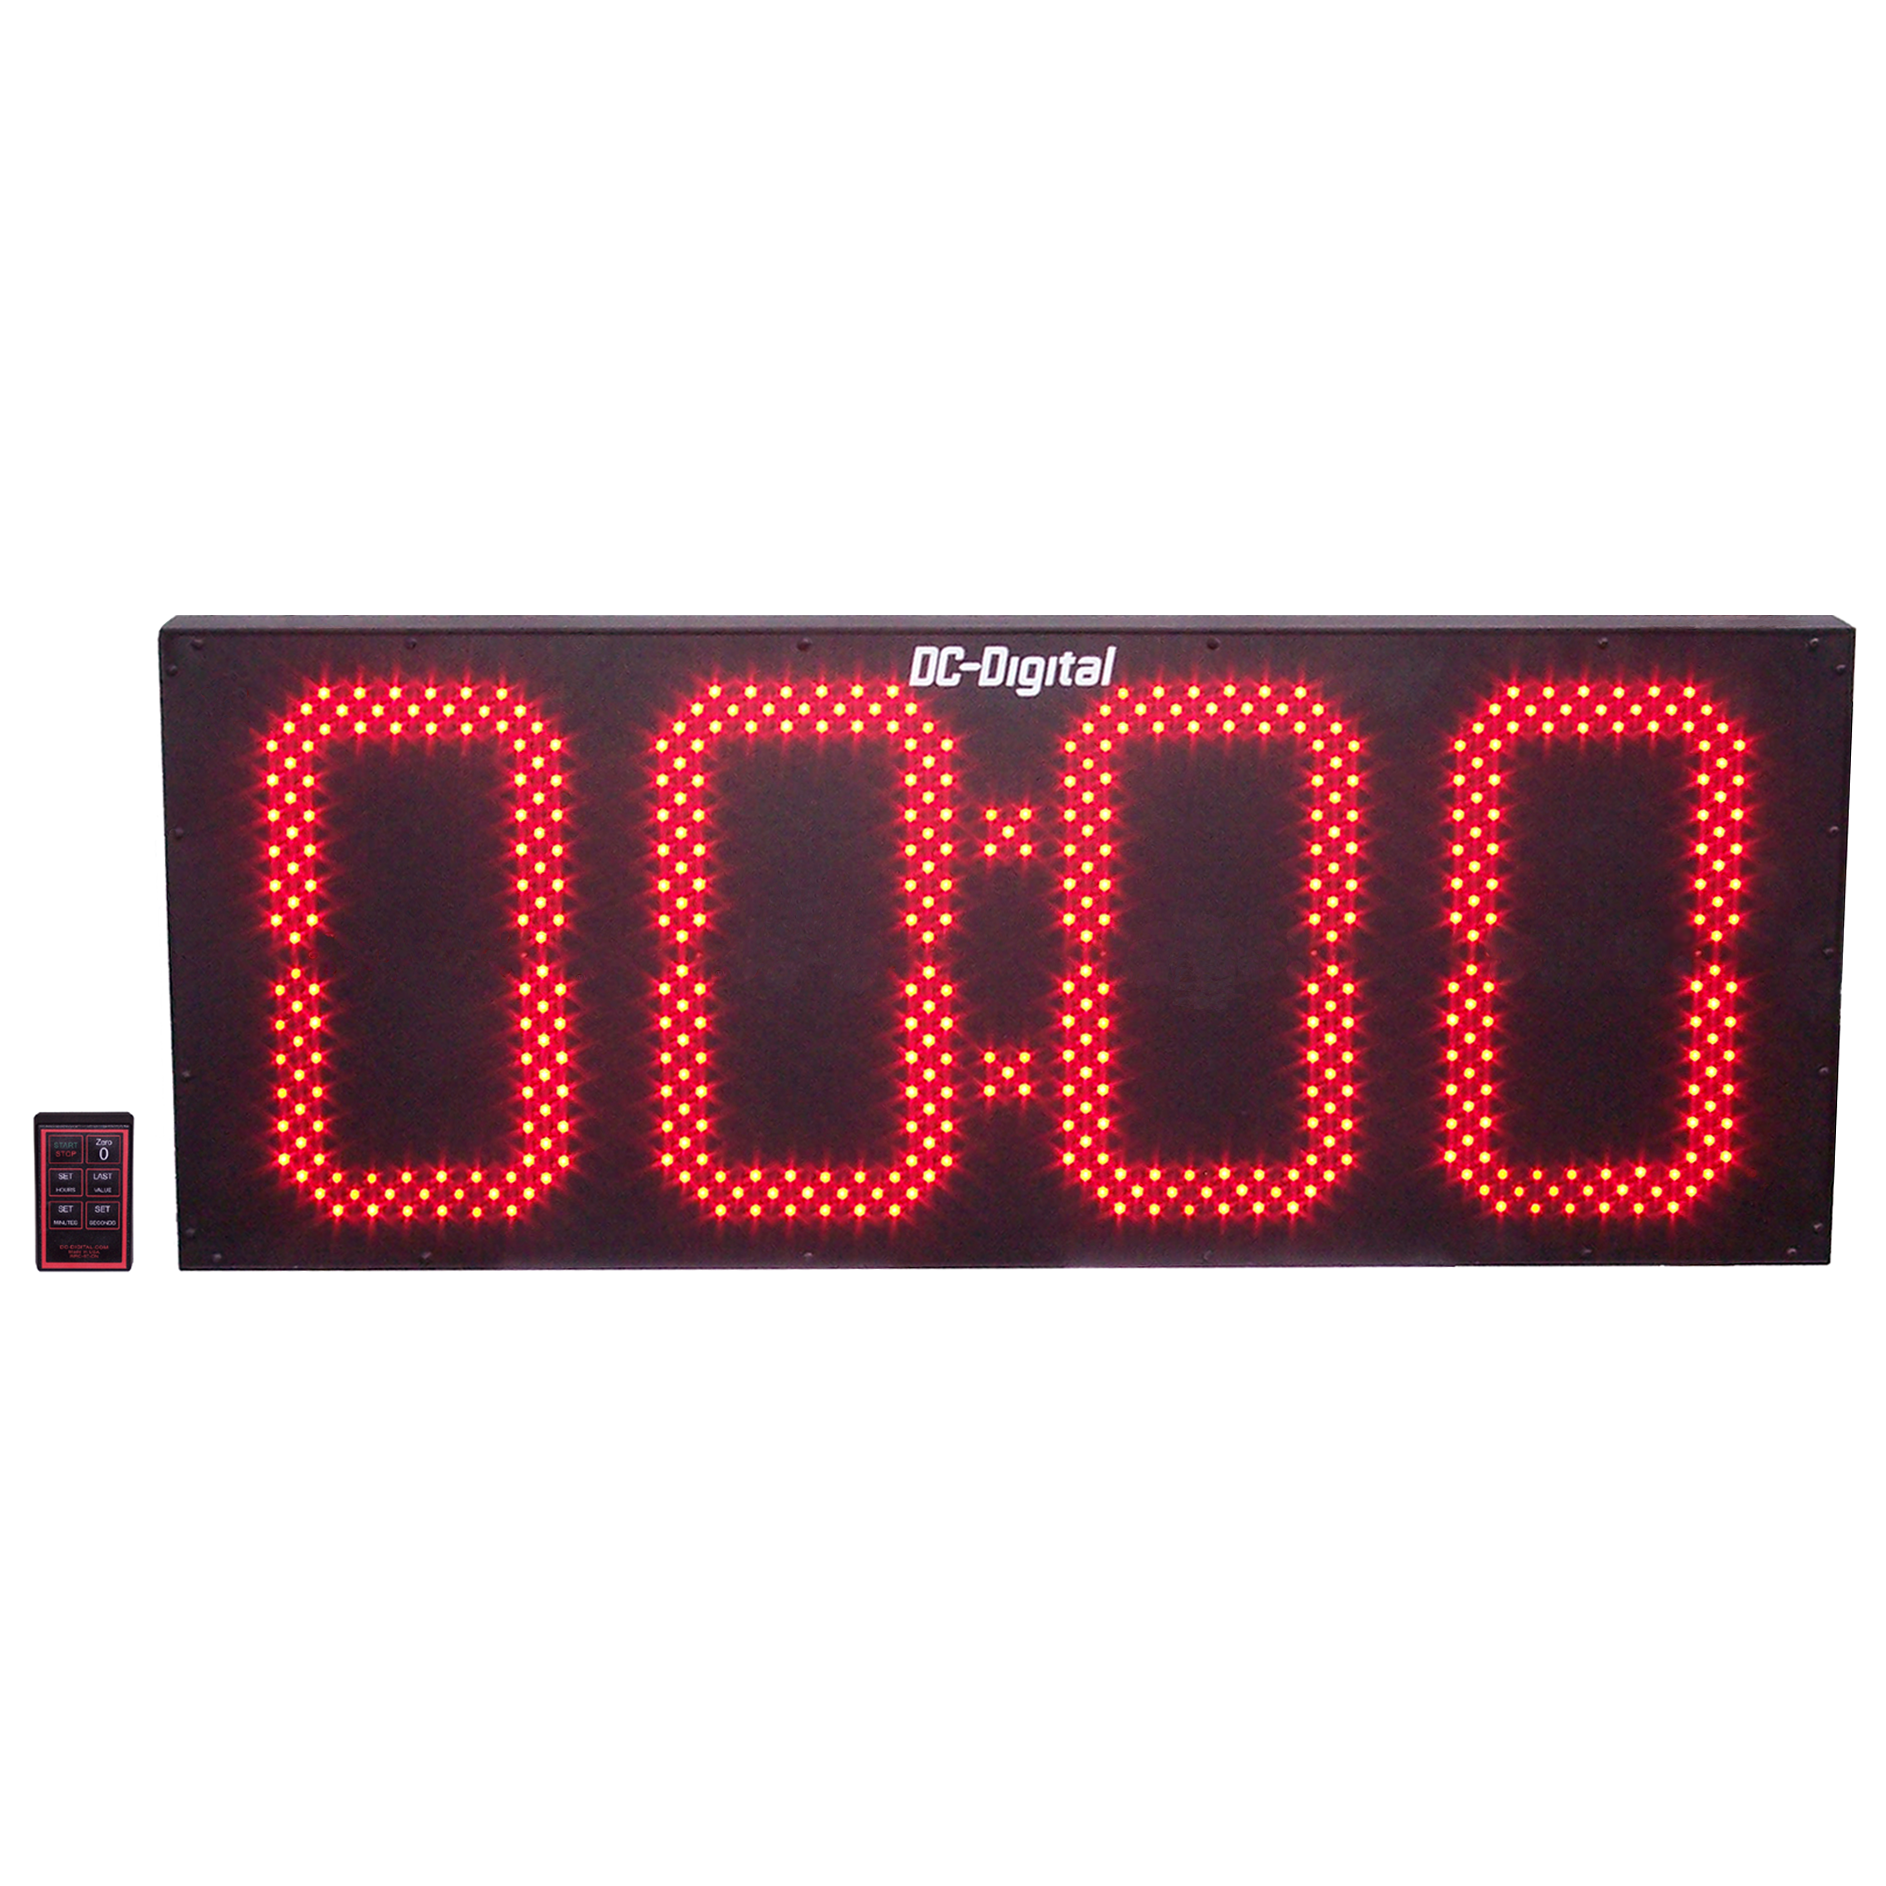 (DC-150T-DN-W-PITCH) Baseball-Softball Pitch Countdown Timer, 15.0 Inch LED Digits, RF-Wireless Remote Controlled (OUTDOOR)